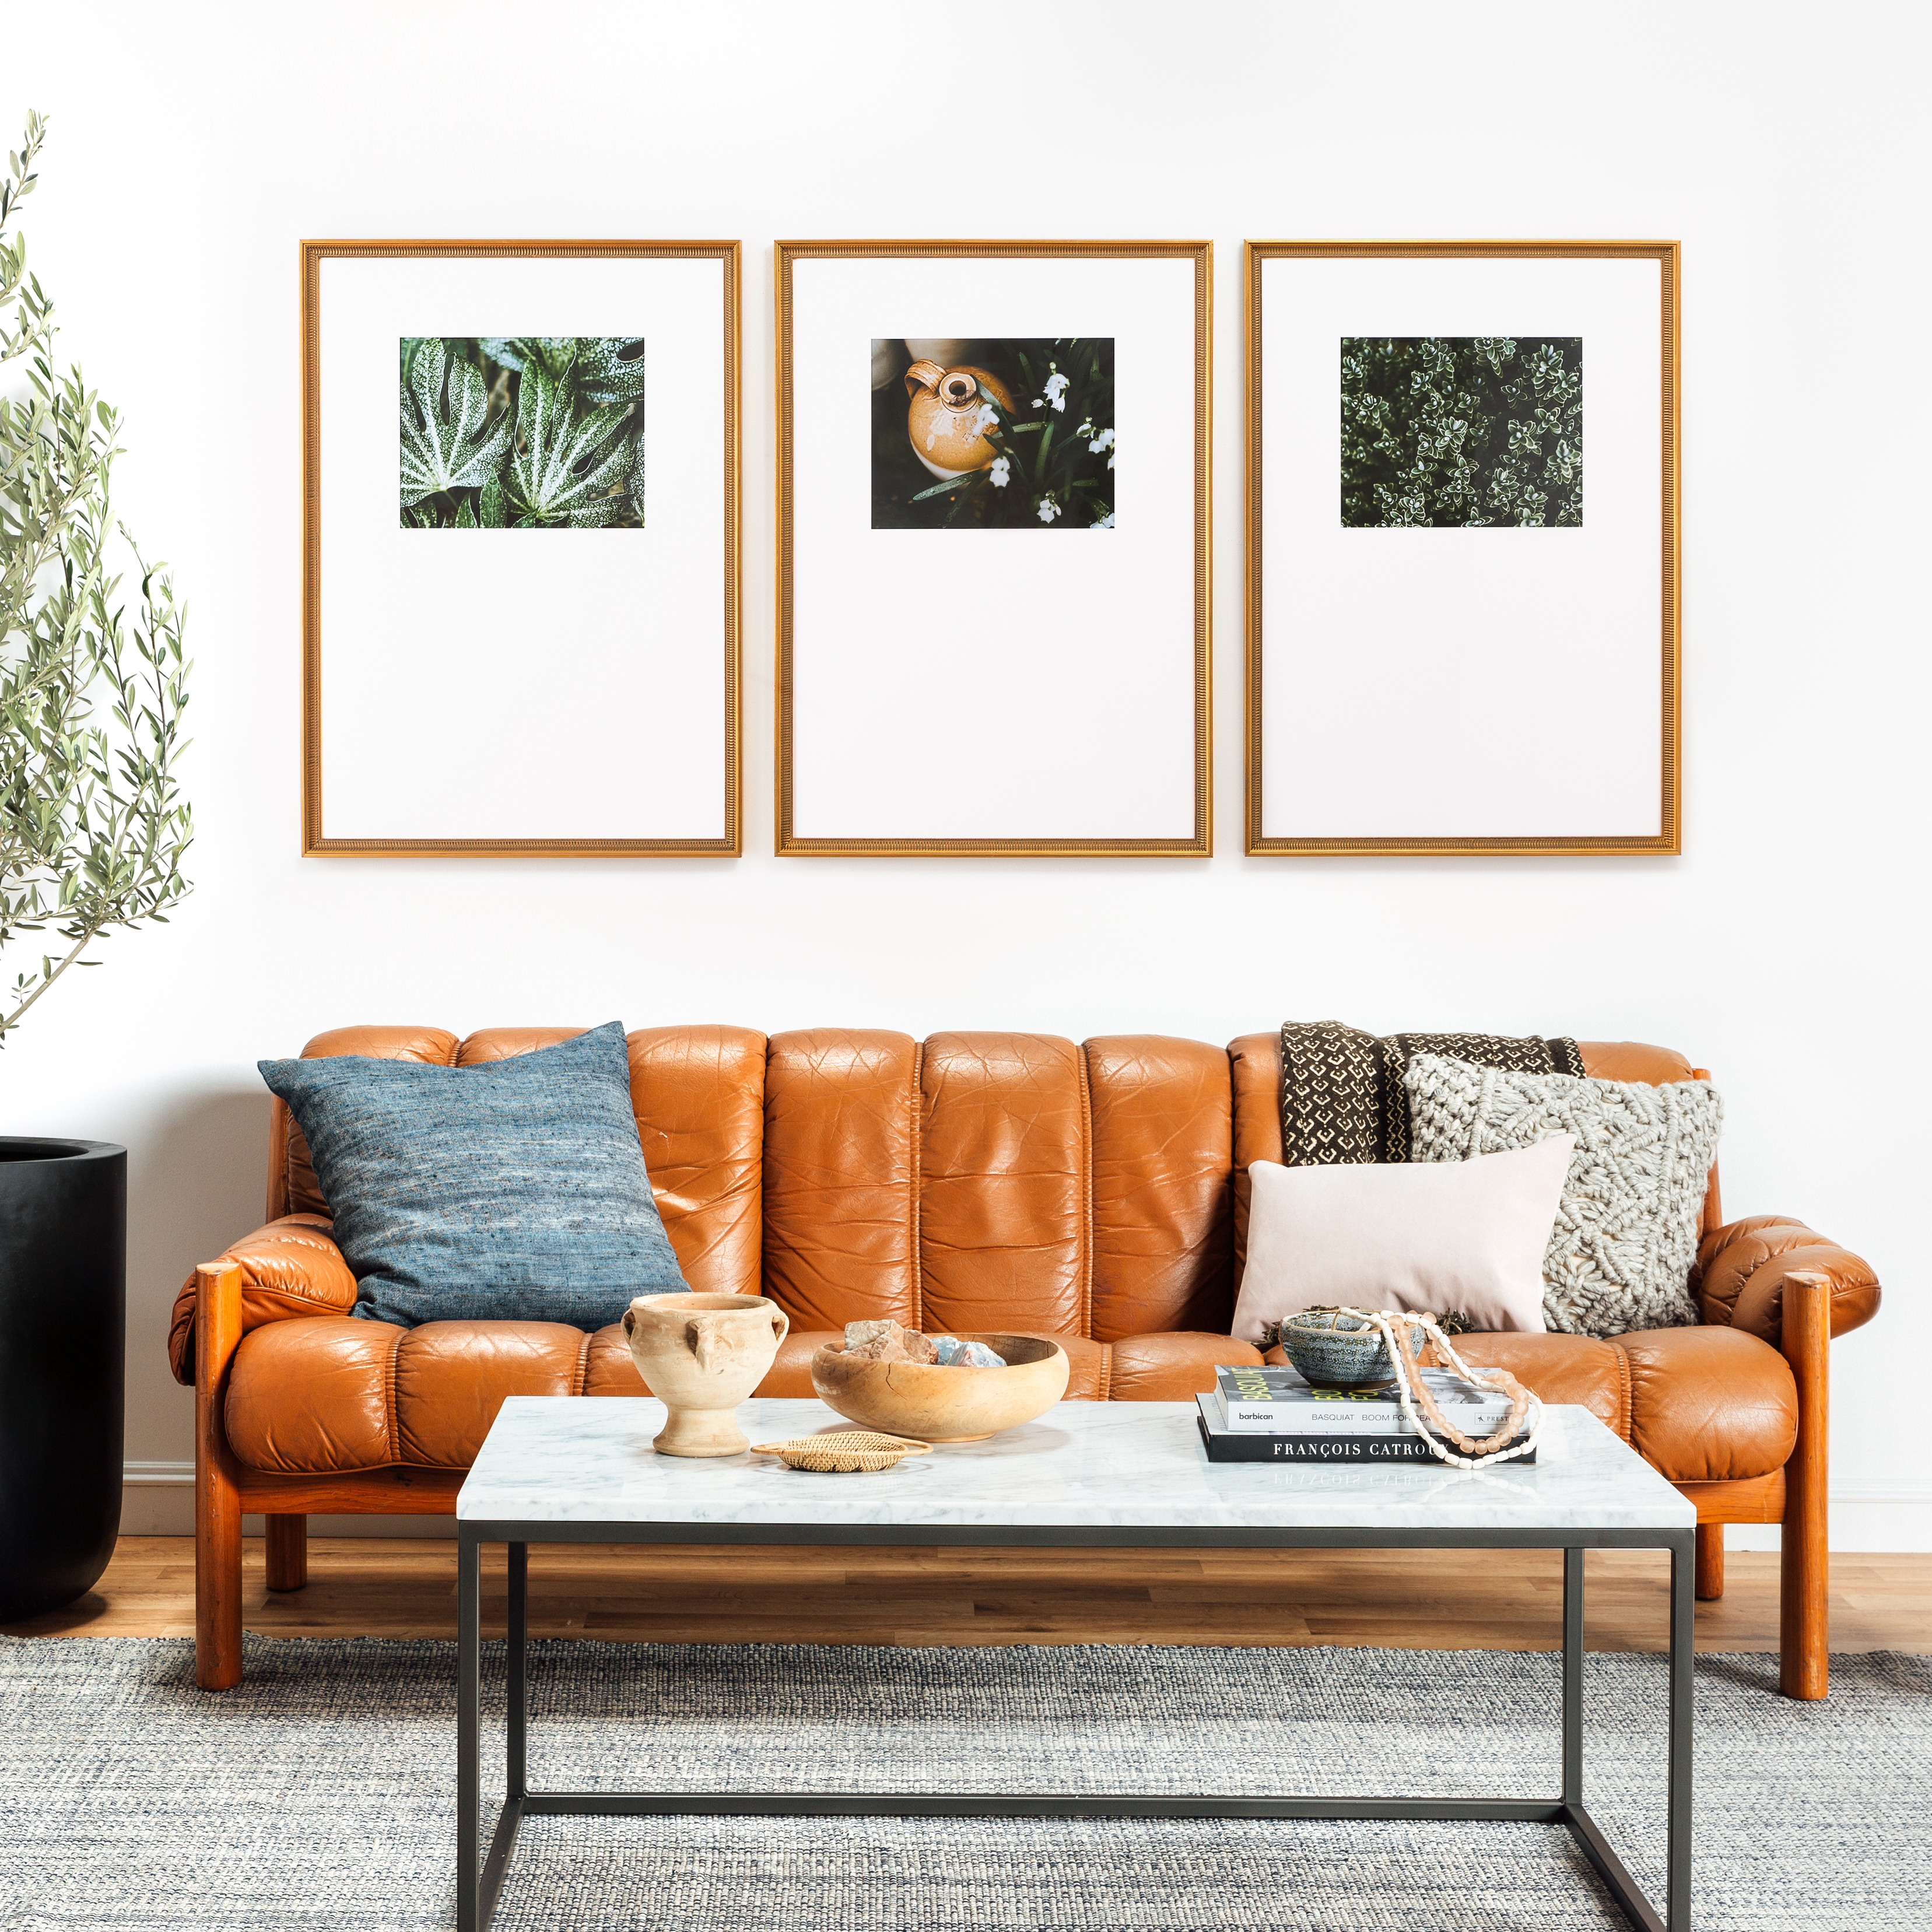 How To Choose Photos For Your Gallery Wall Framebridge